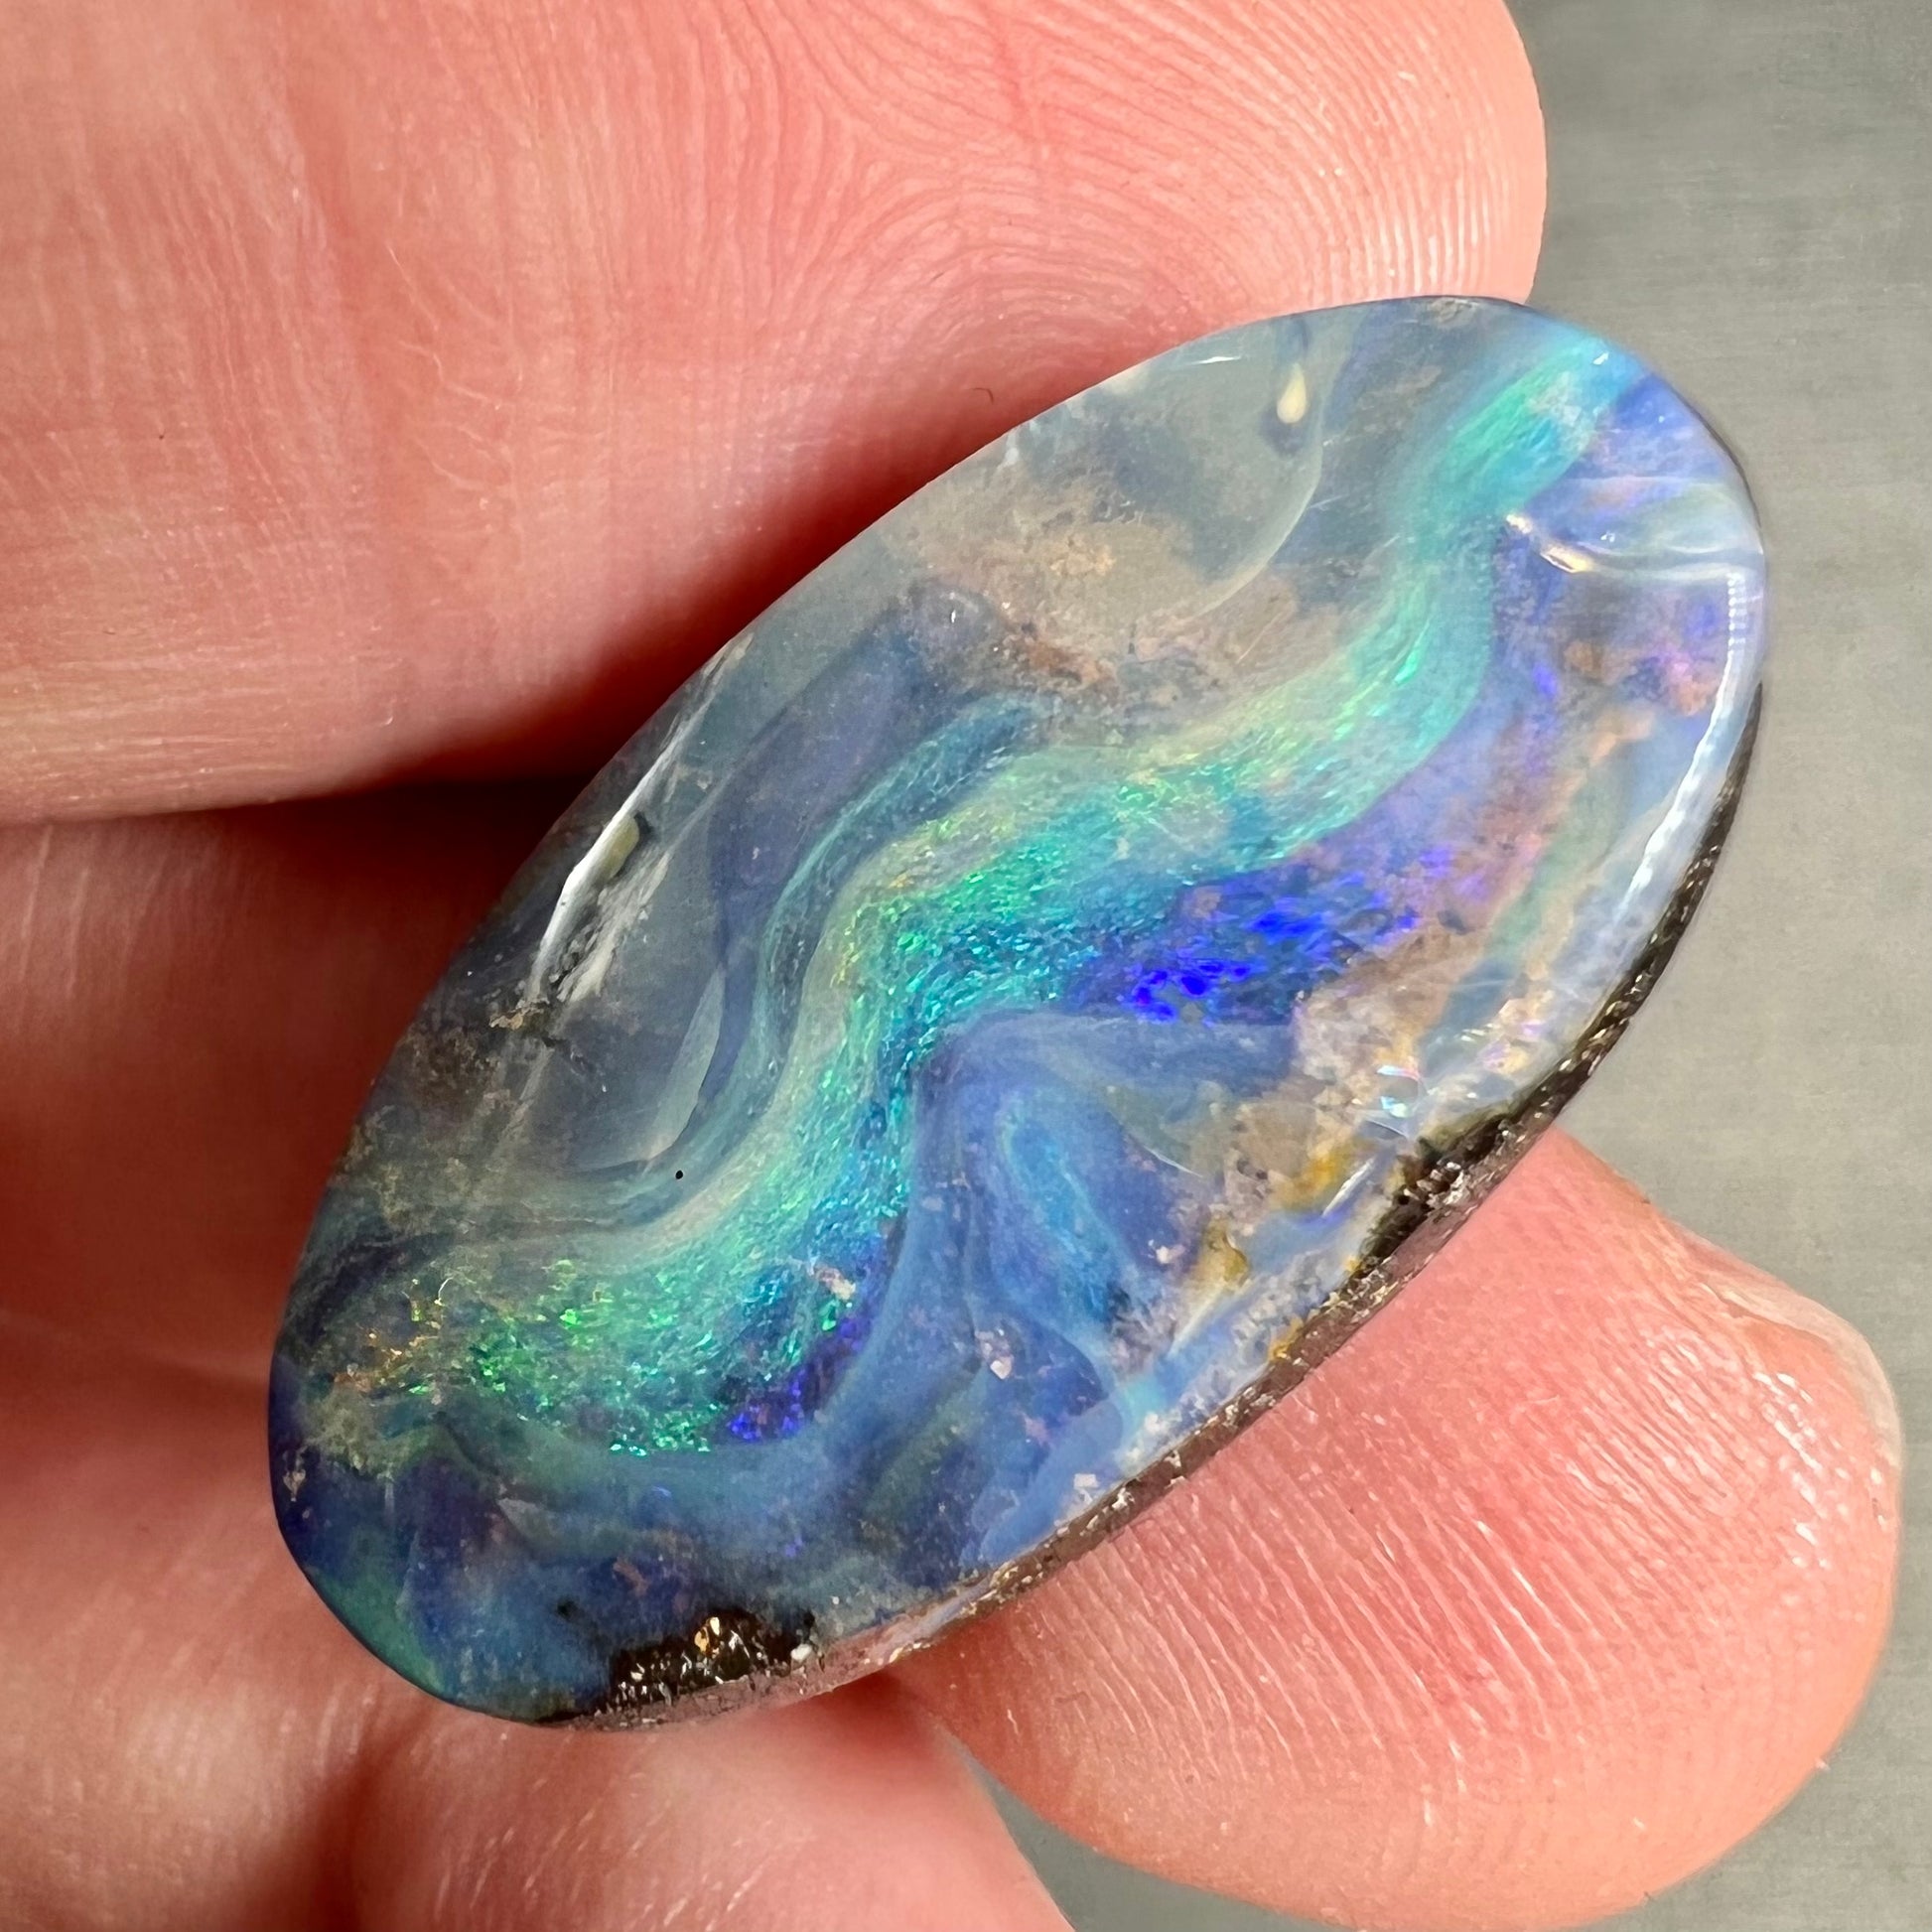 A loose, oval cabochon cut Quilpie boulder opal from Queensland, Australia.  The stone is blue with green fire.